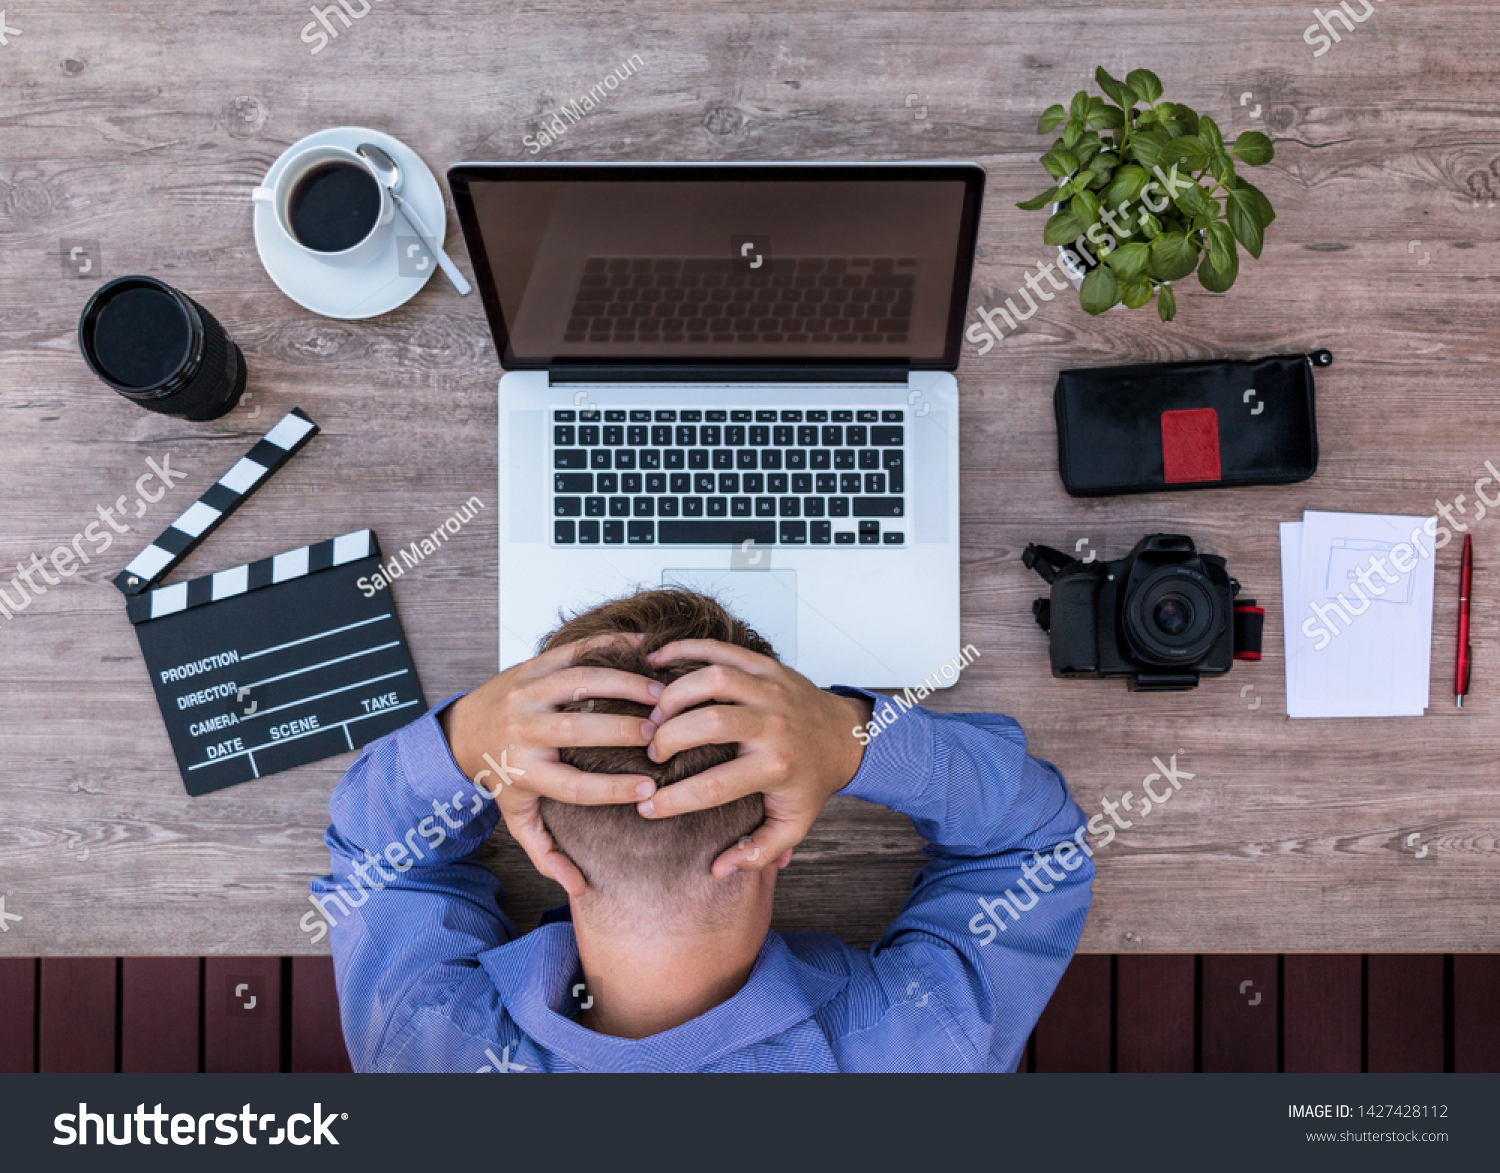 Man in a bad mood holding his head with his hands with technology gear on his desk, content creator burnout. #1427428112